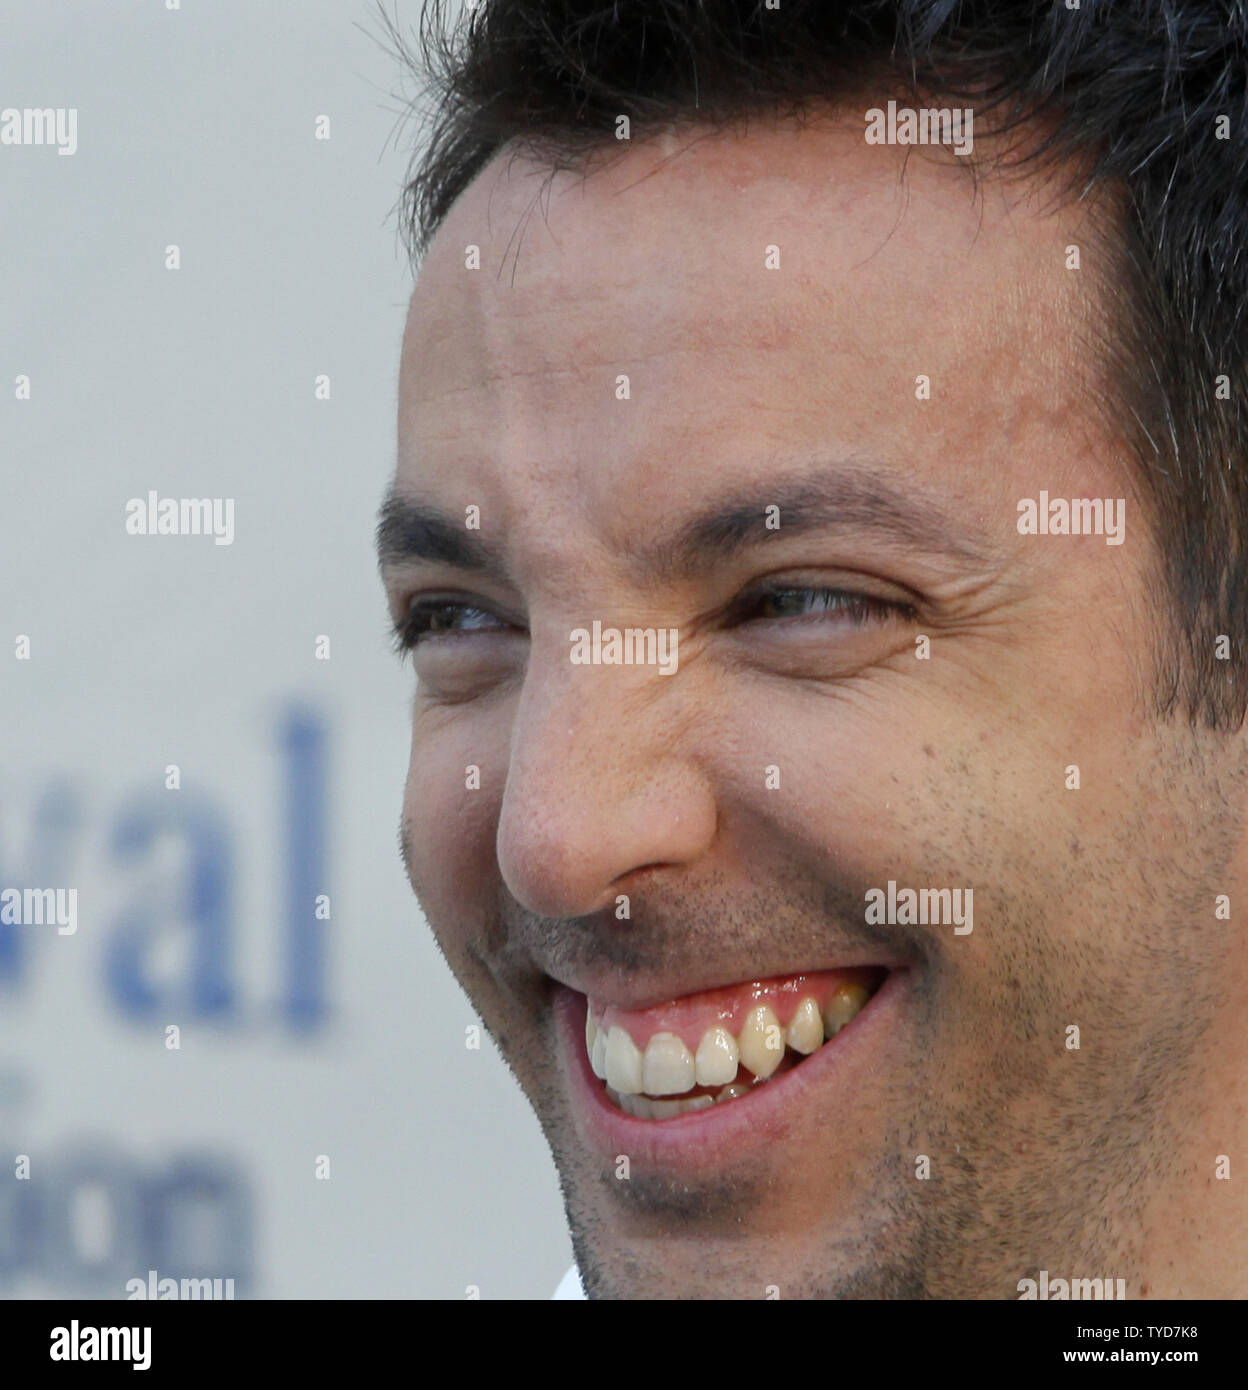 Actor Doudi arrives at a photocall for the television show 'Samantha, Oups ! ' during the 49th Monte Carlo Television Festival in Monte Carlo, Monaco on June 9, 2009.  (UPI Photo/David Silpa) Stock Photo